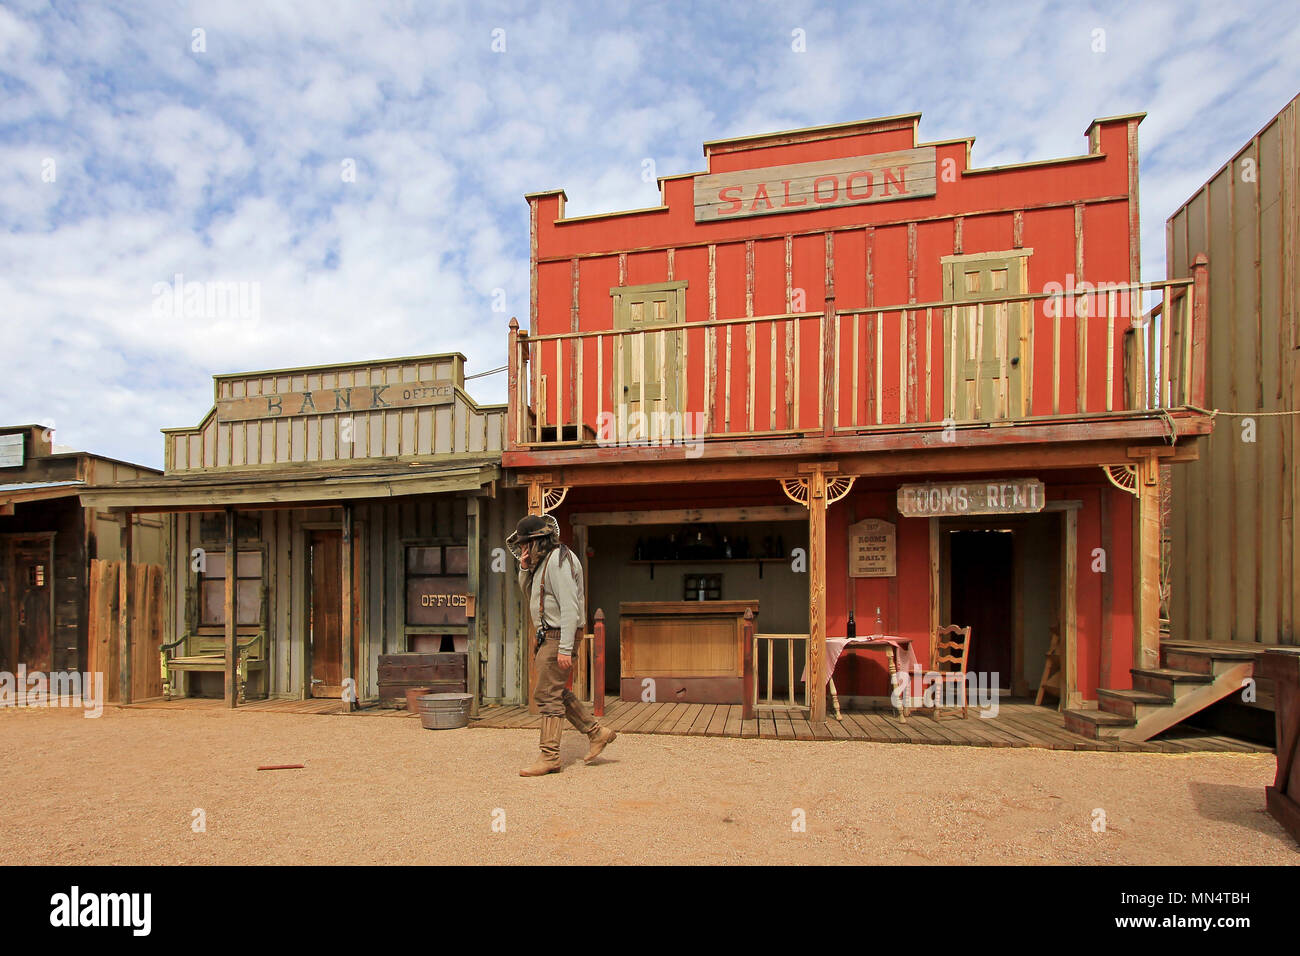 Western houses on the stage of the O.K. Corral gunfight in Tombstone, Arizona Stock Photo